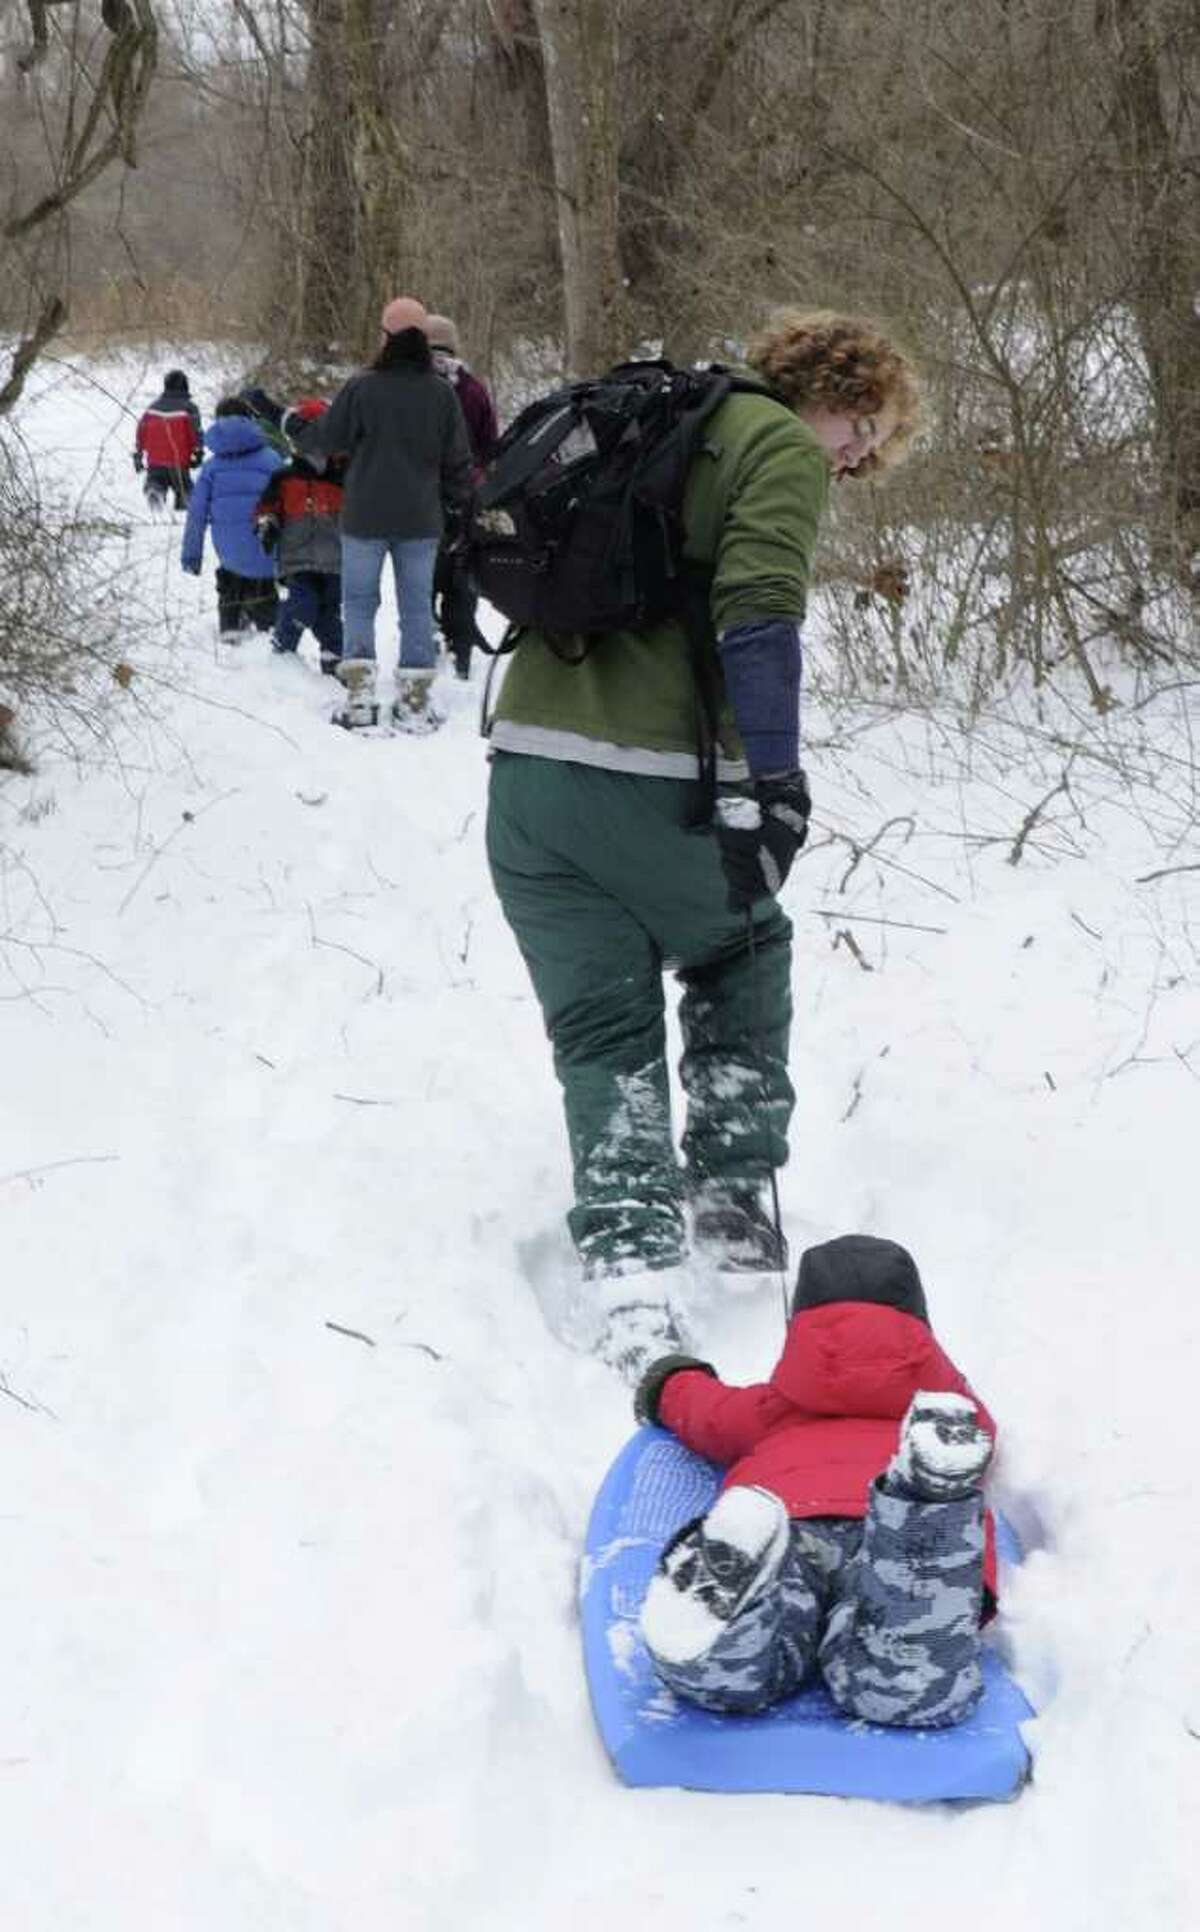 Camp counselor Calder Gladstone, 19, pulls Eli Adjmi , 5, on a sled during a hike held at the Pratt Nature Center winter camp in New Milford on Tuesday, Dec. 28, 2010.